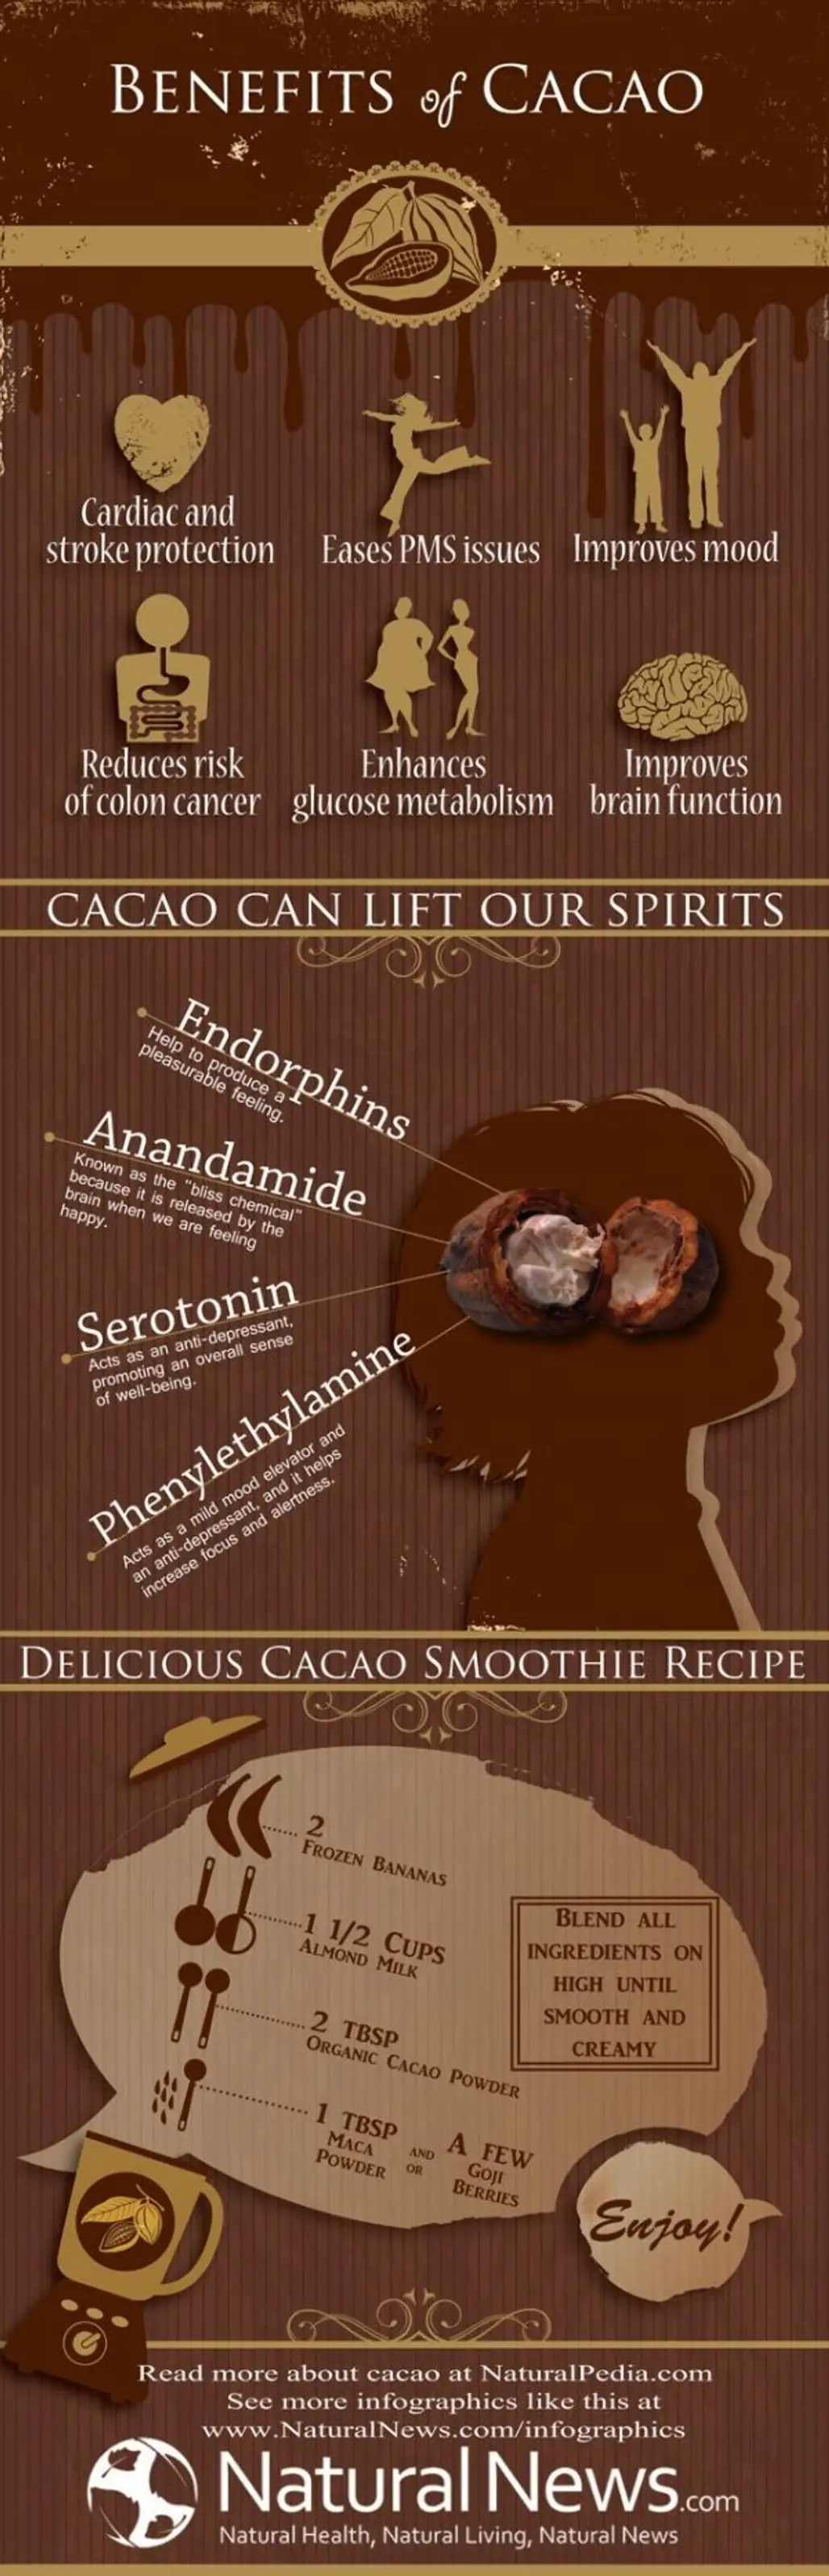 Benefits of Cacao